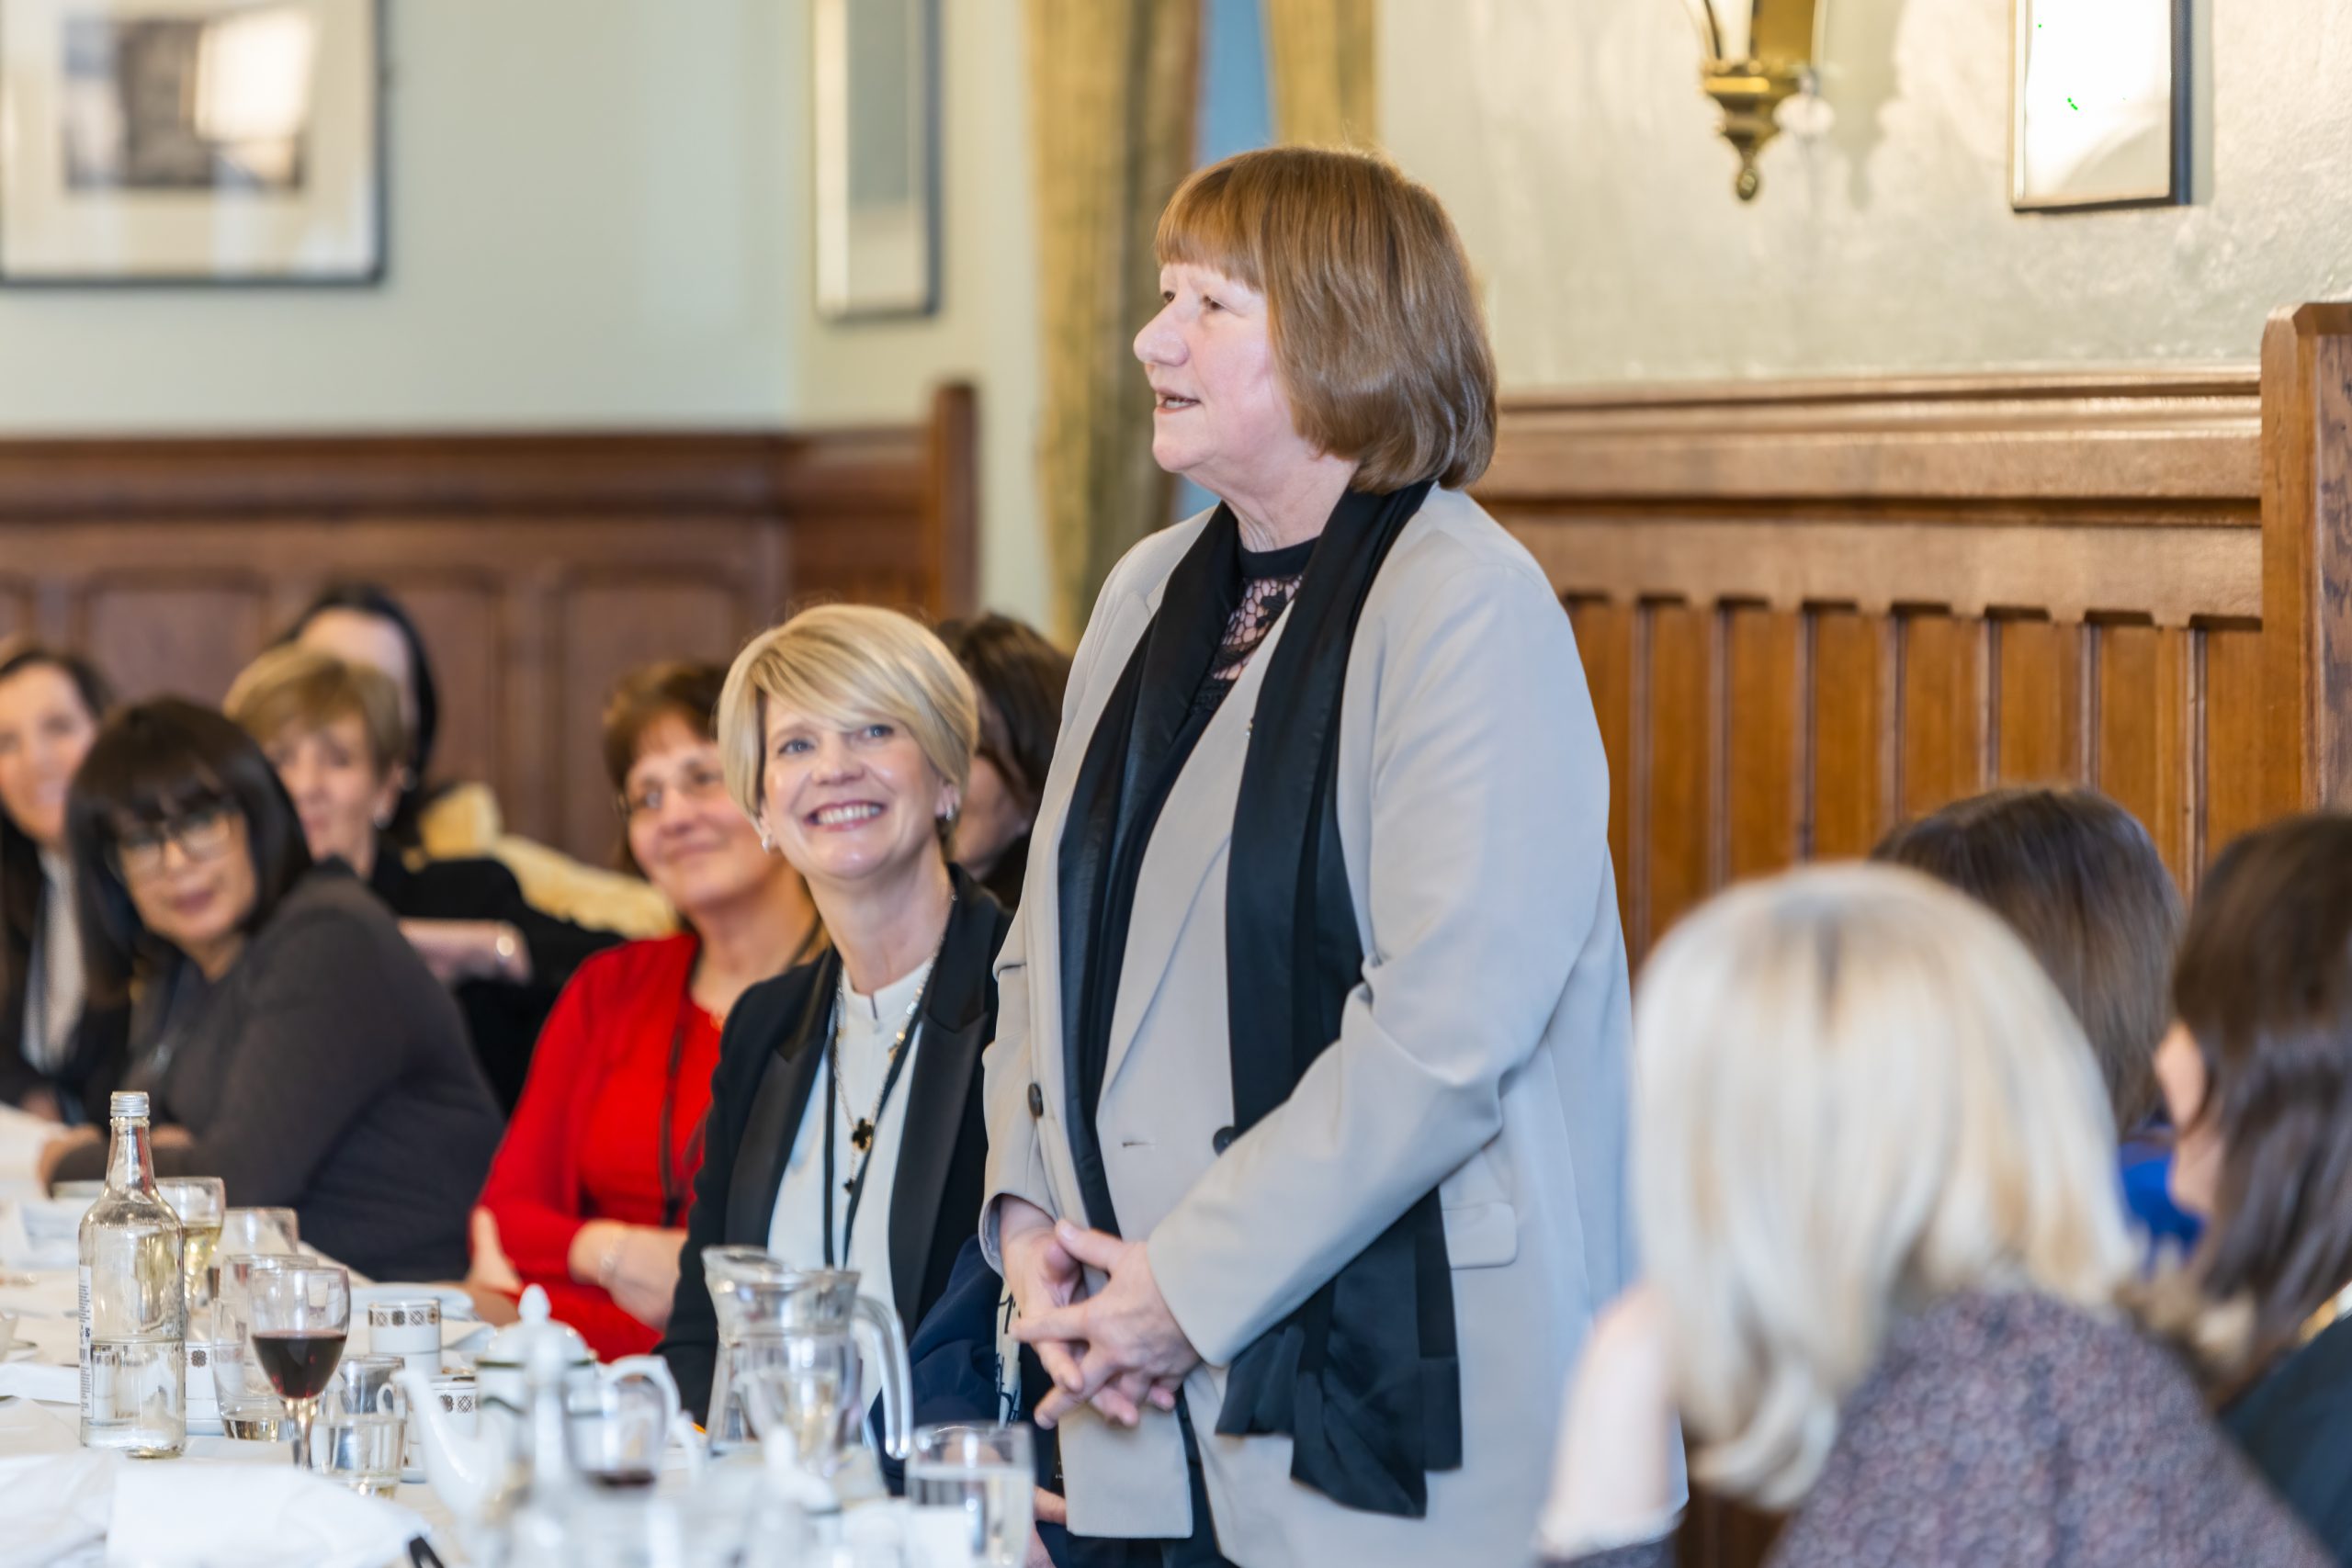 Ladies First Professional Development Awards, House of Commons